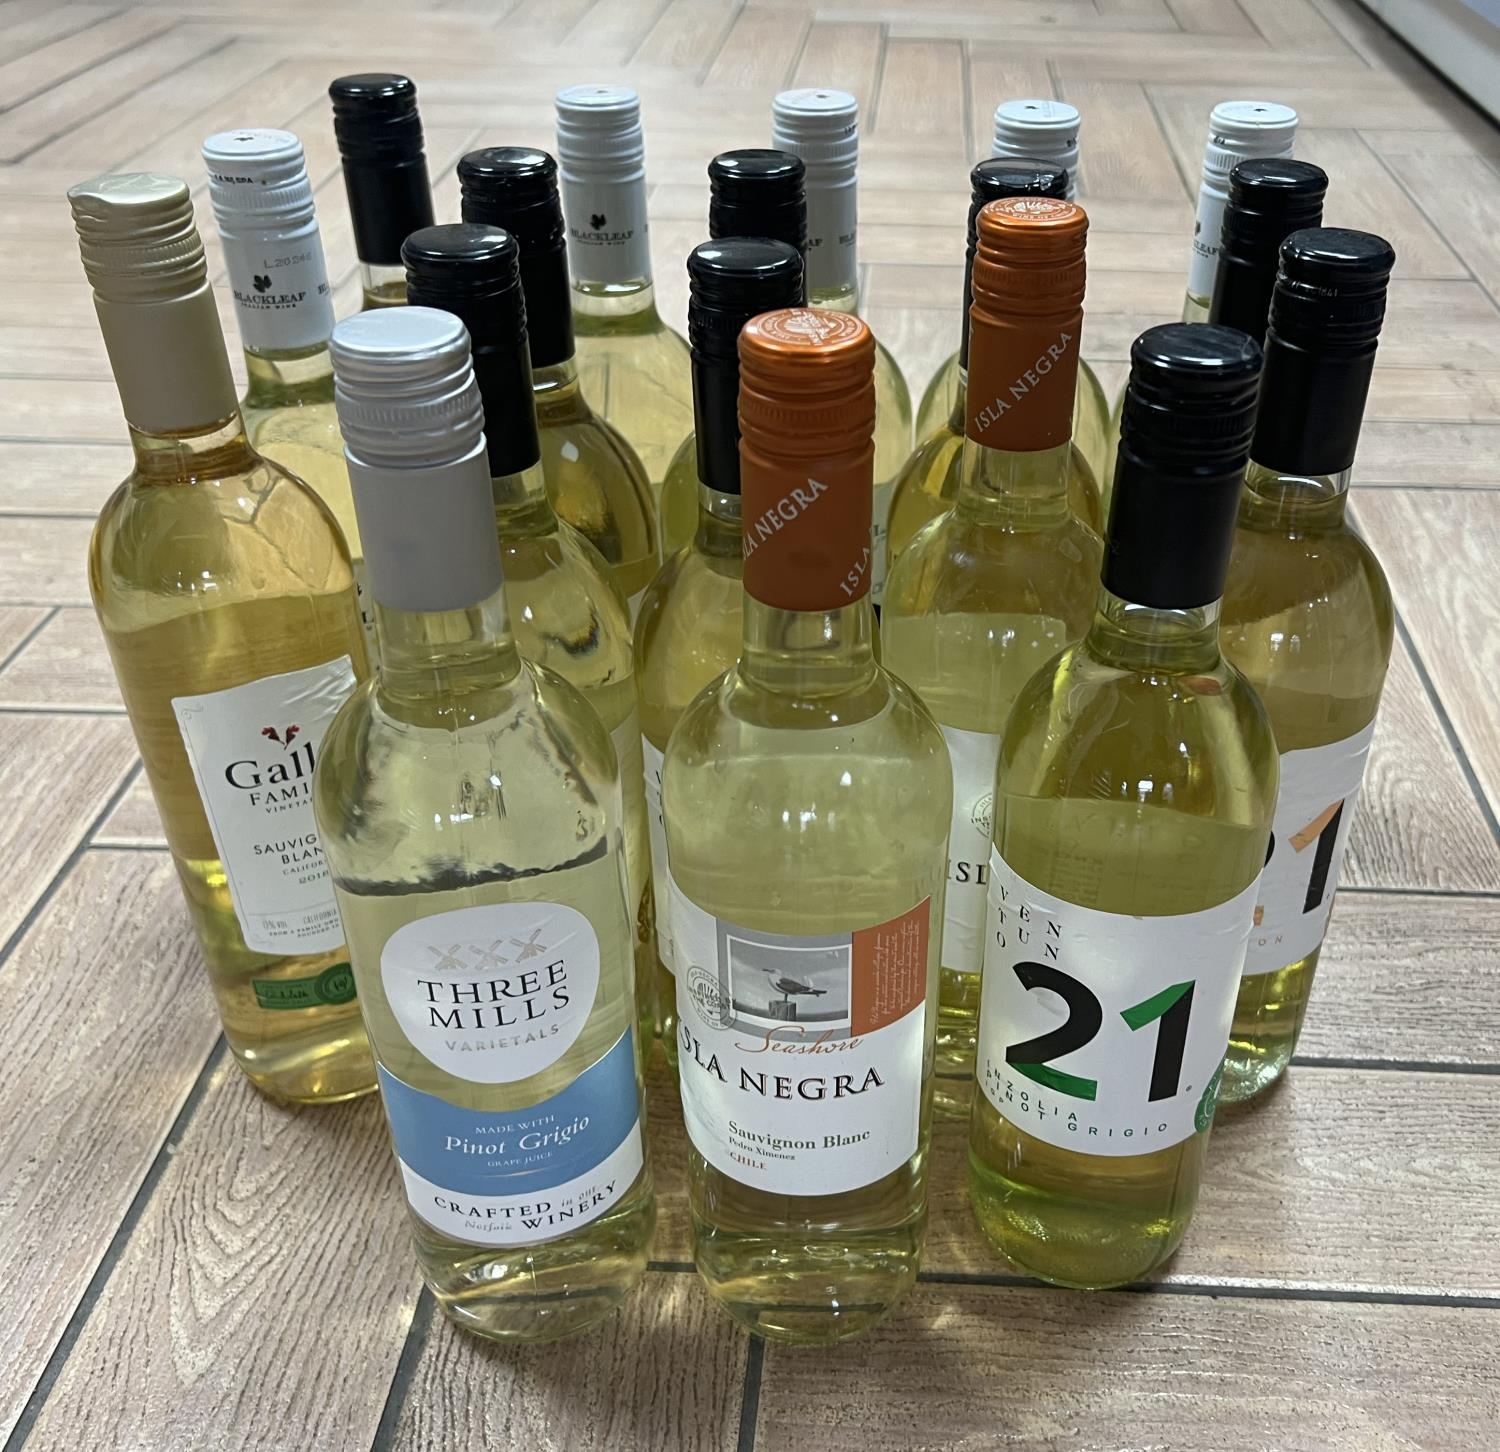 18 bottles of white wine to include Gallo family, Three mills and Isla Negra